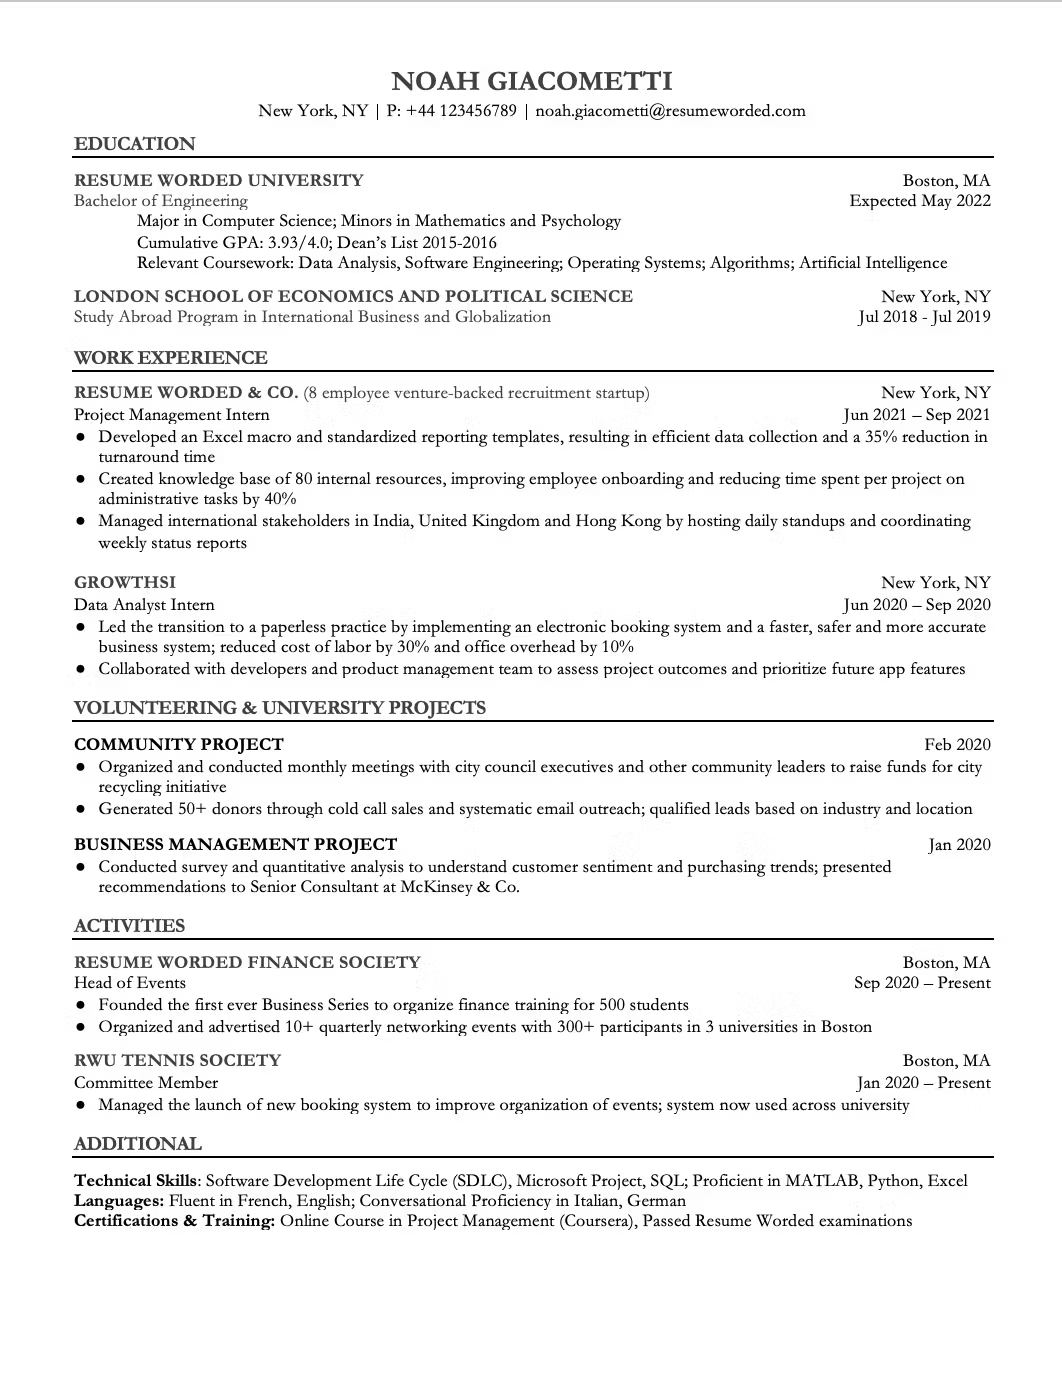 Example of a one-page resume for an entry-level position